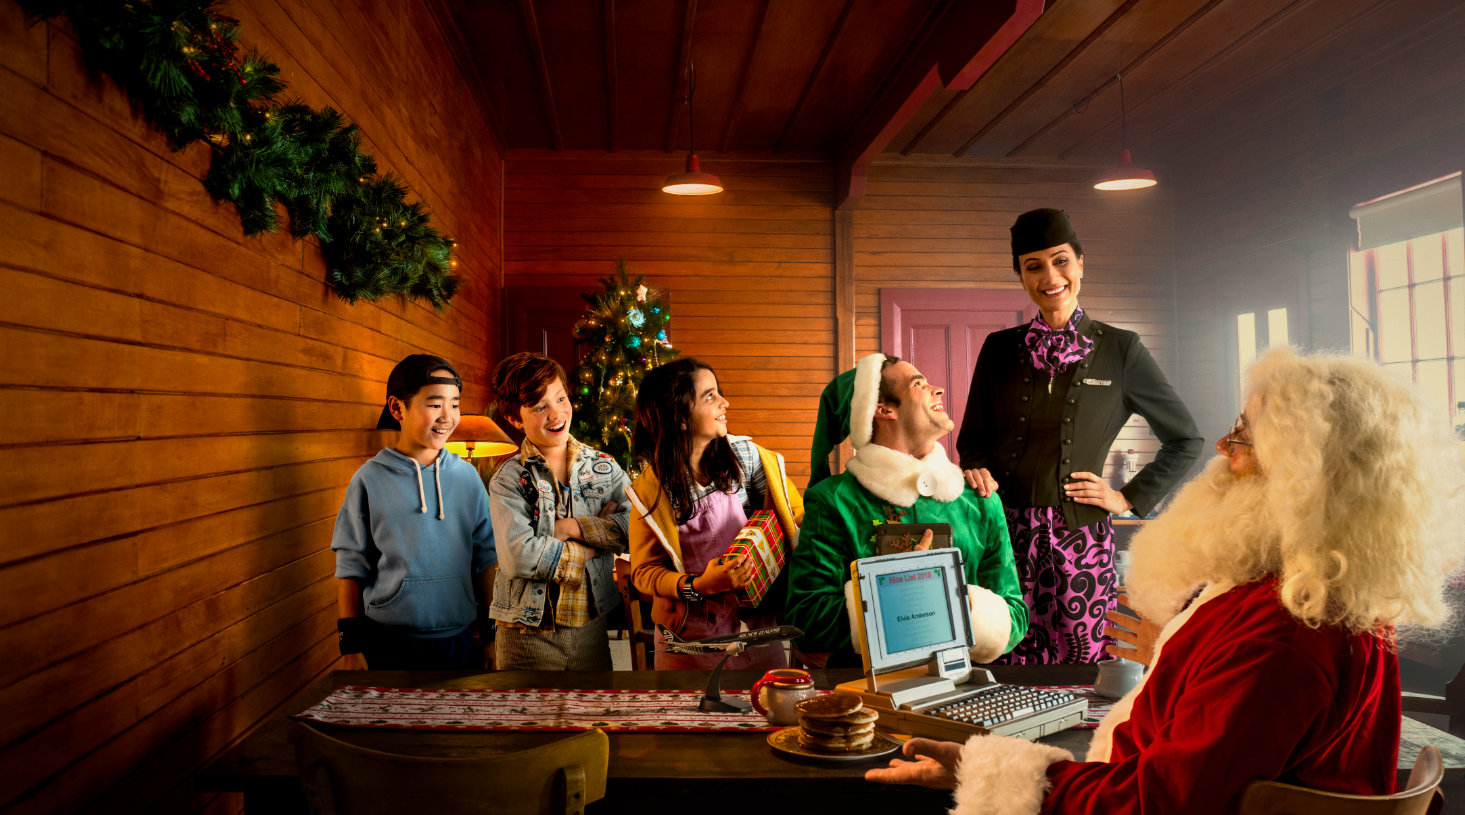 The Nicest Christmas Ever: Air New Zealand's Festive Ad Is Quirky But Definitely Worth a Watch